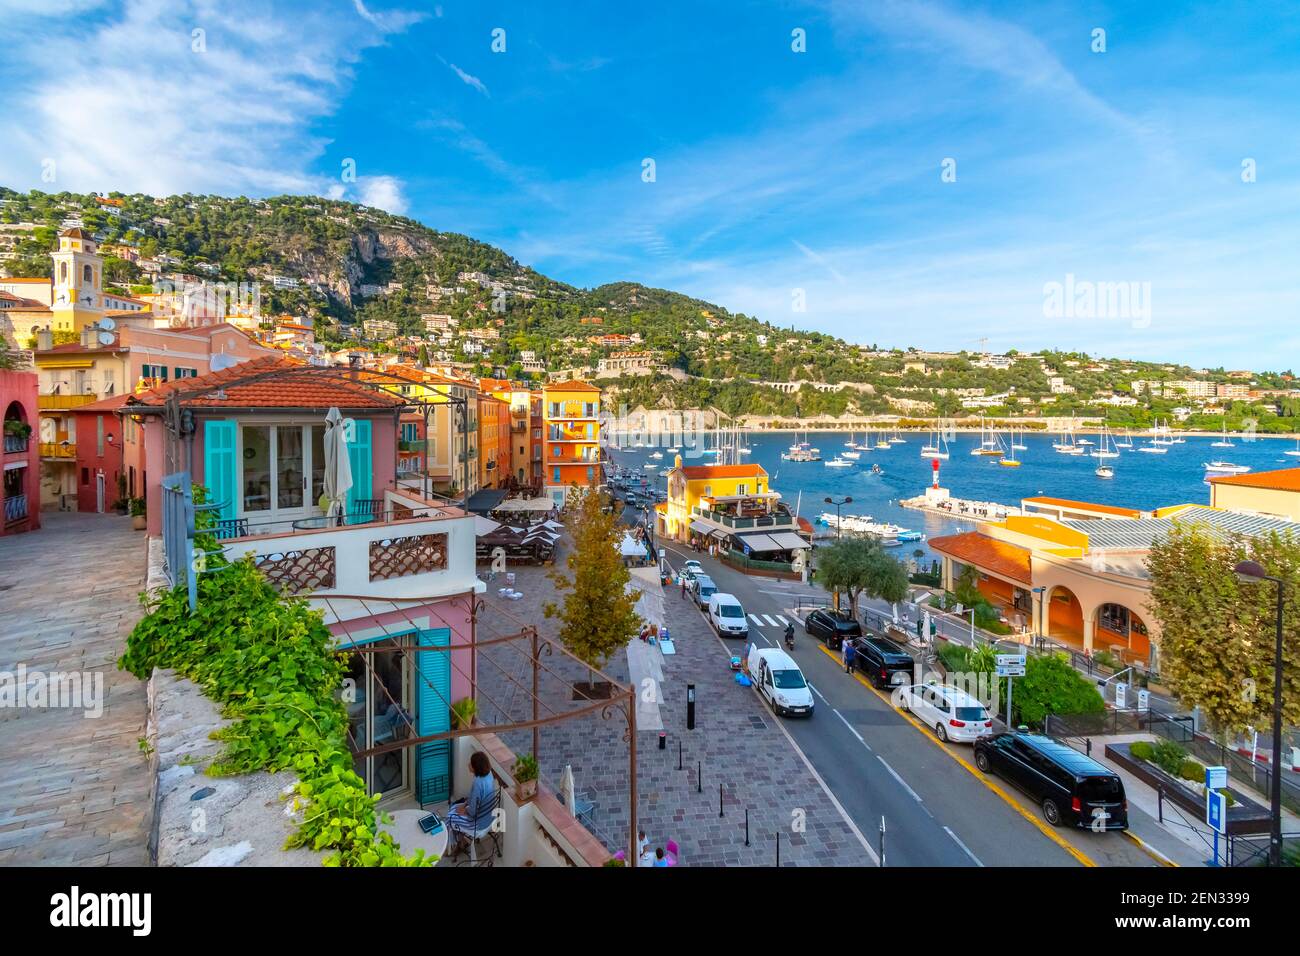 Scenic view of the colorful town, bay and marina of Villefranche Sur Mer, on the French Riviera coast of Southern France. Stock Photo